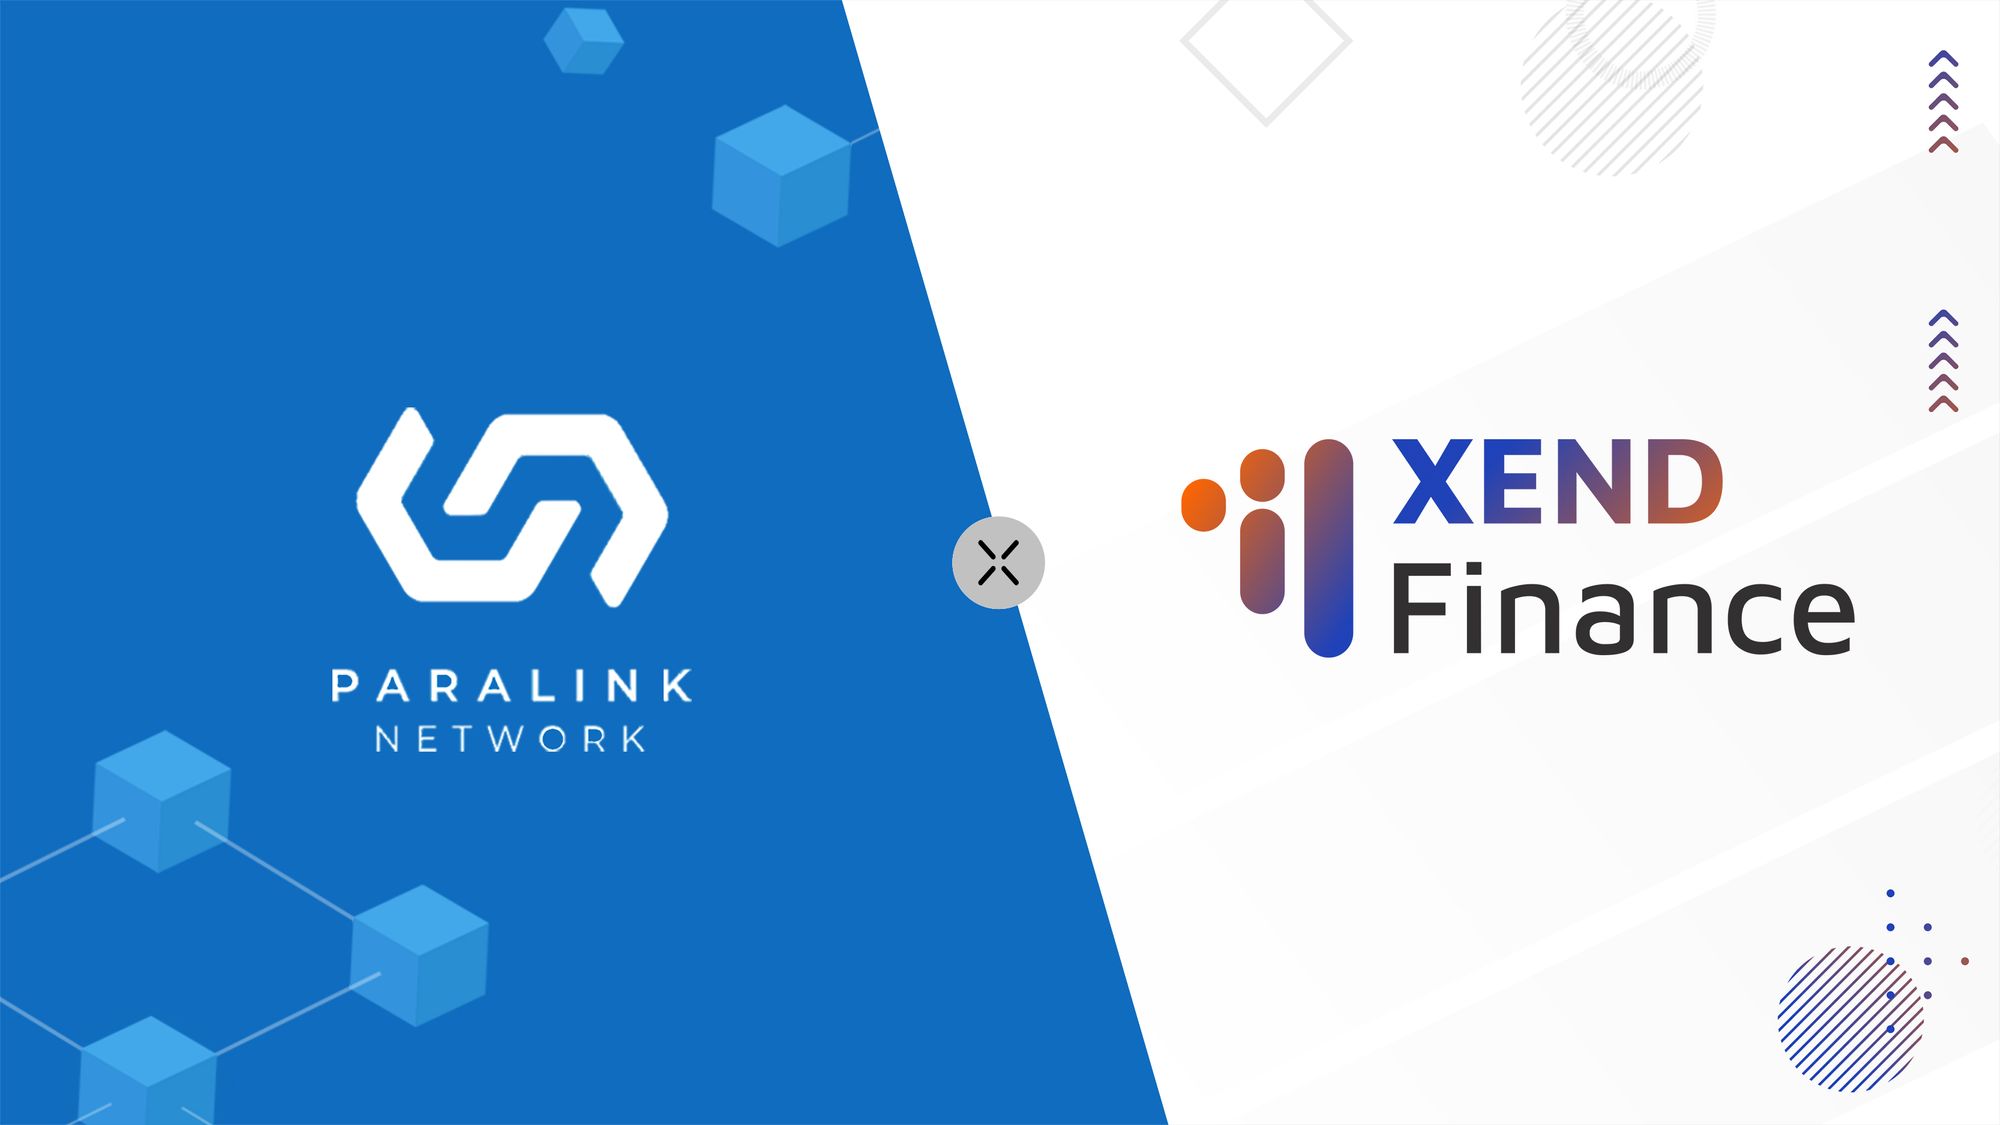 Paralink Network and Xend Finance enter a strategic partnership to integrate multi-chain oracle solutions